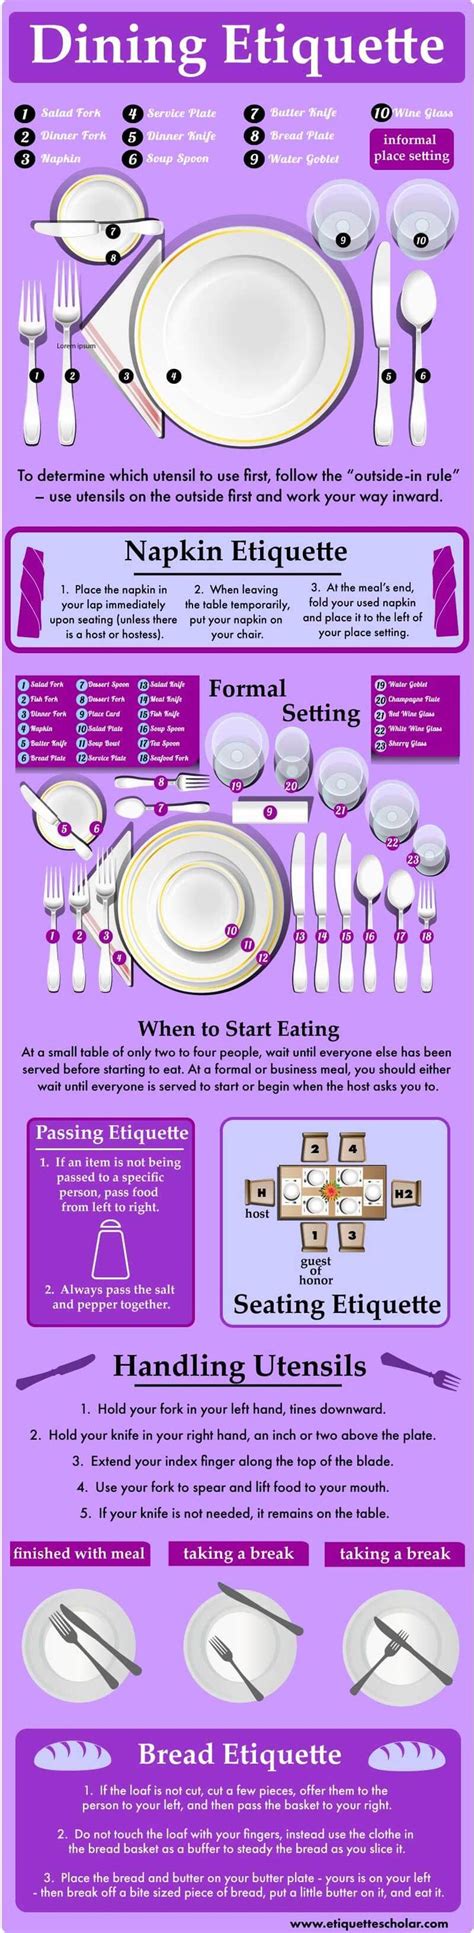 a purple and white poster with different types of plates, knives, spoons and utensils